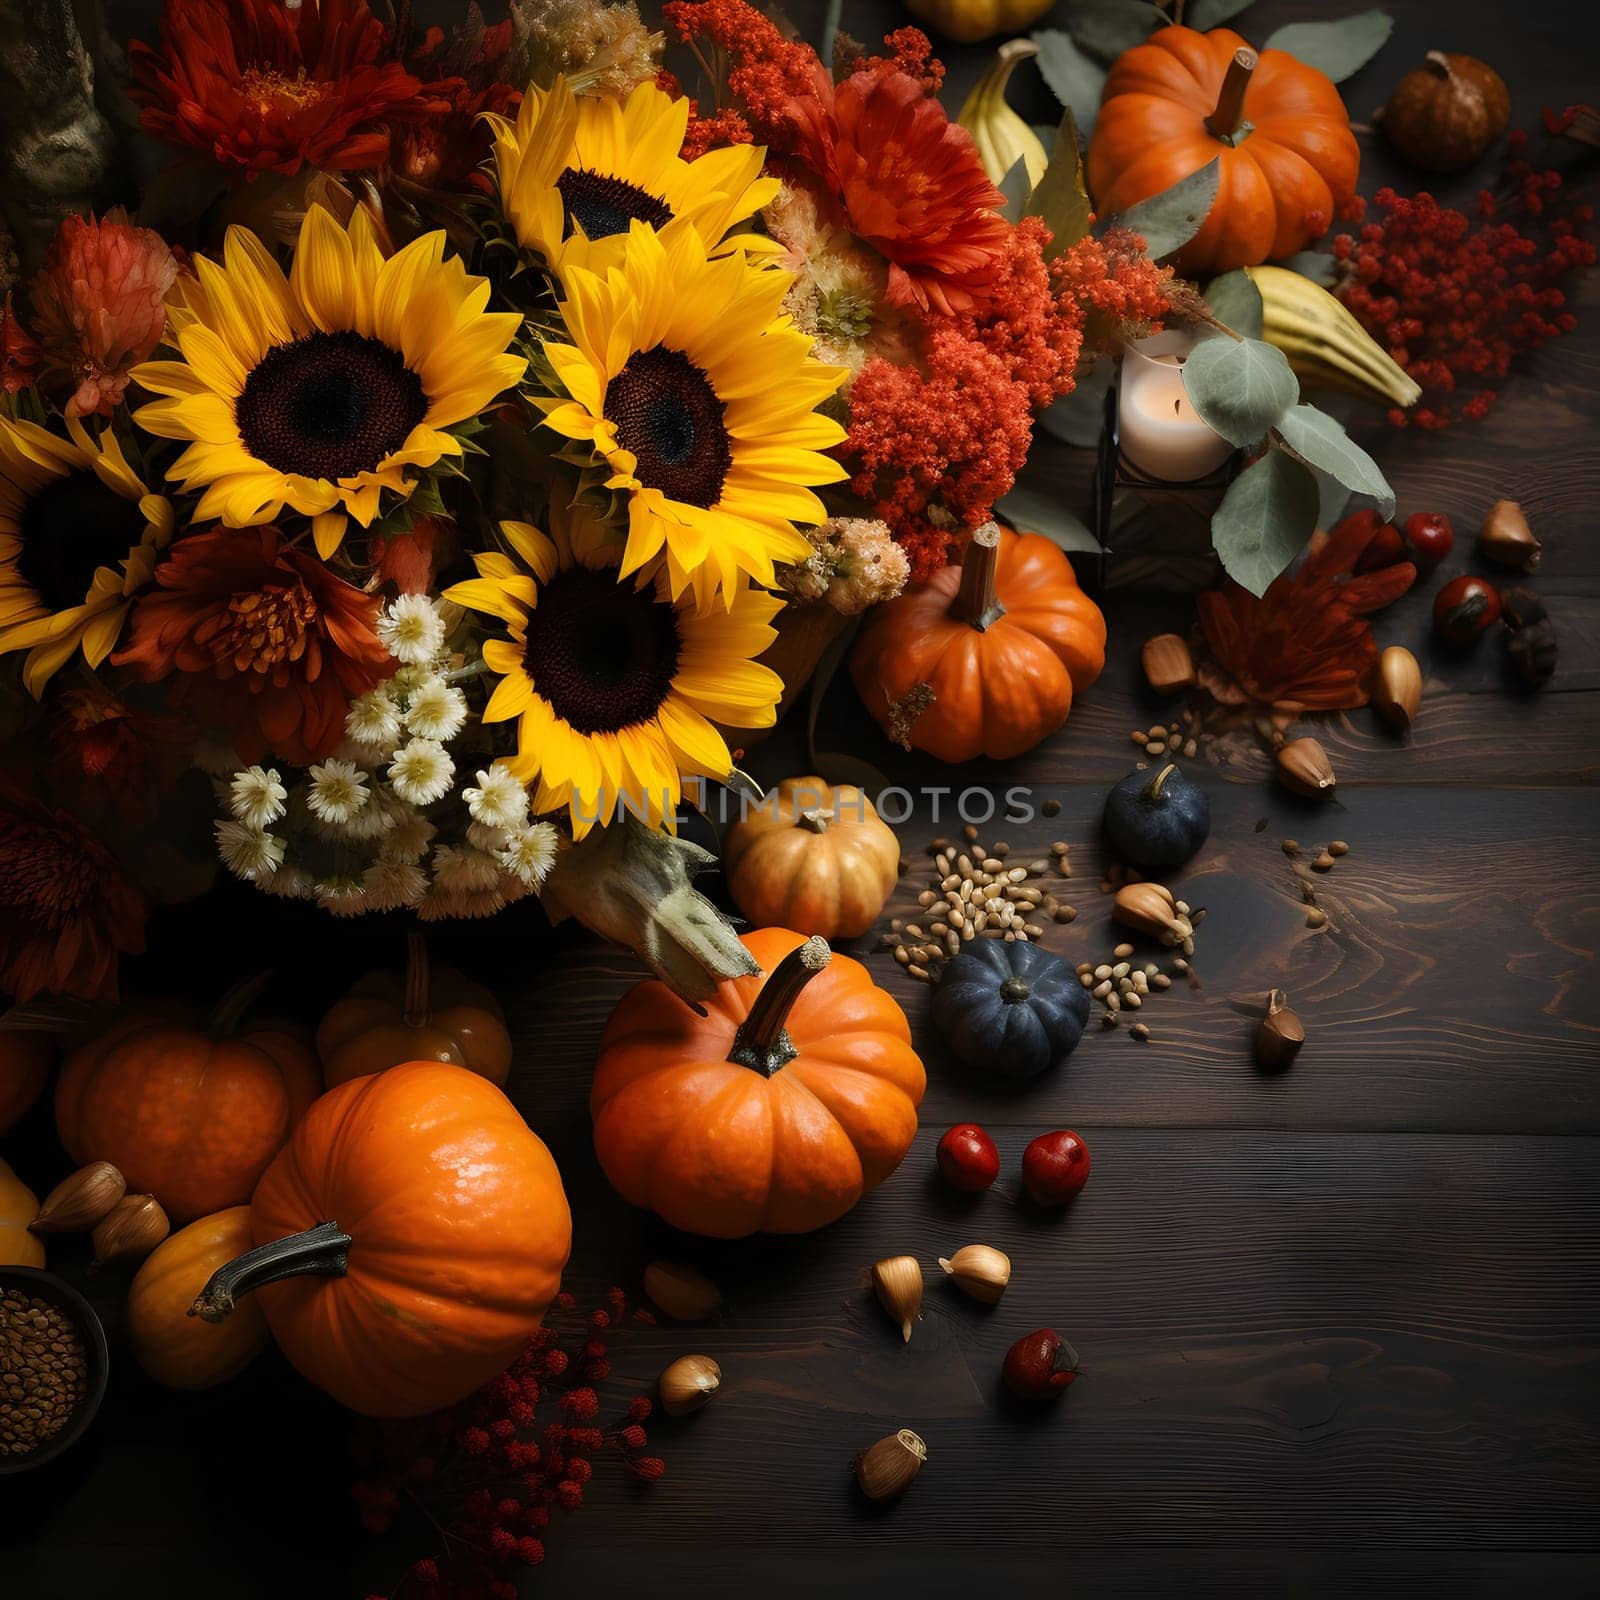 Aerial view of colorful flowers, pumpkins, harvest from the field on wooden boards. Pumpkin as a dish of thanksgiving for the harvest. An atmosphere of joy and celebration.